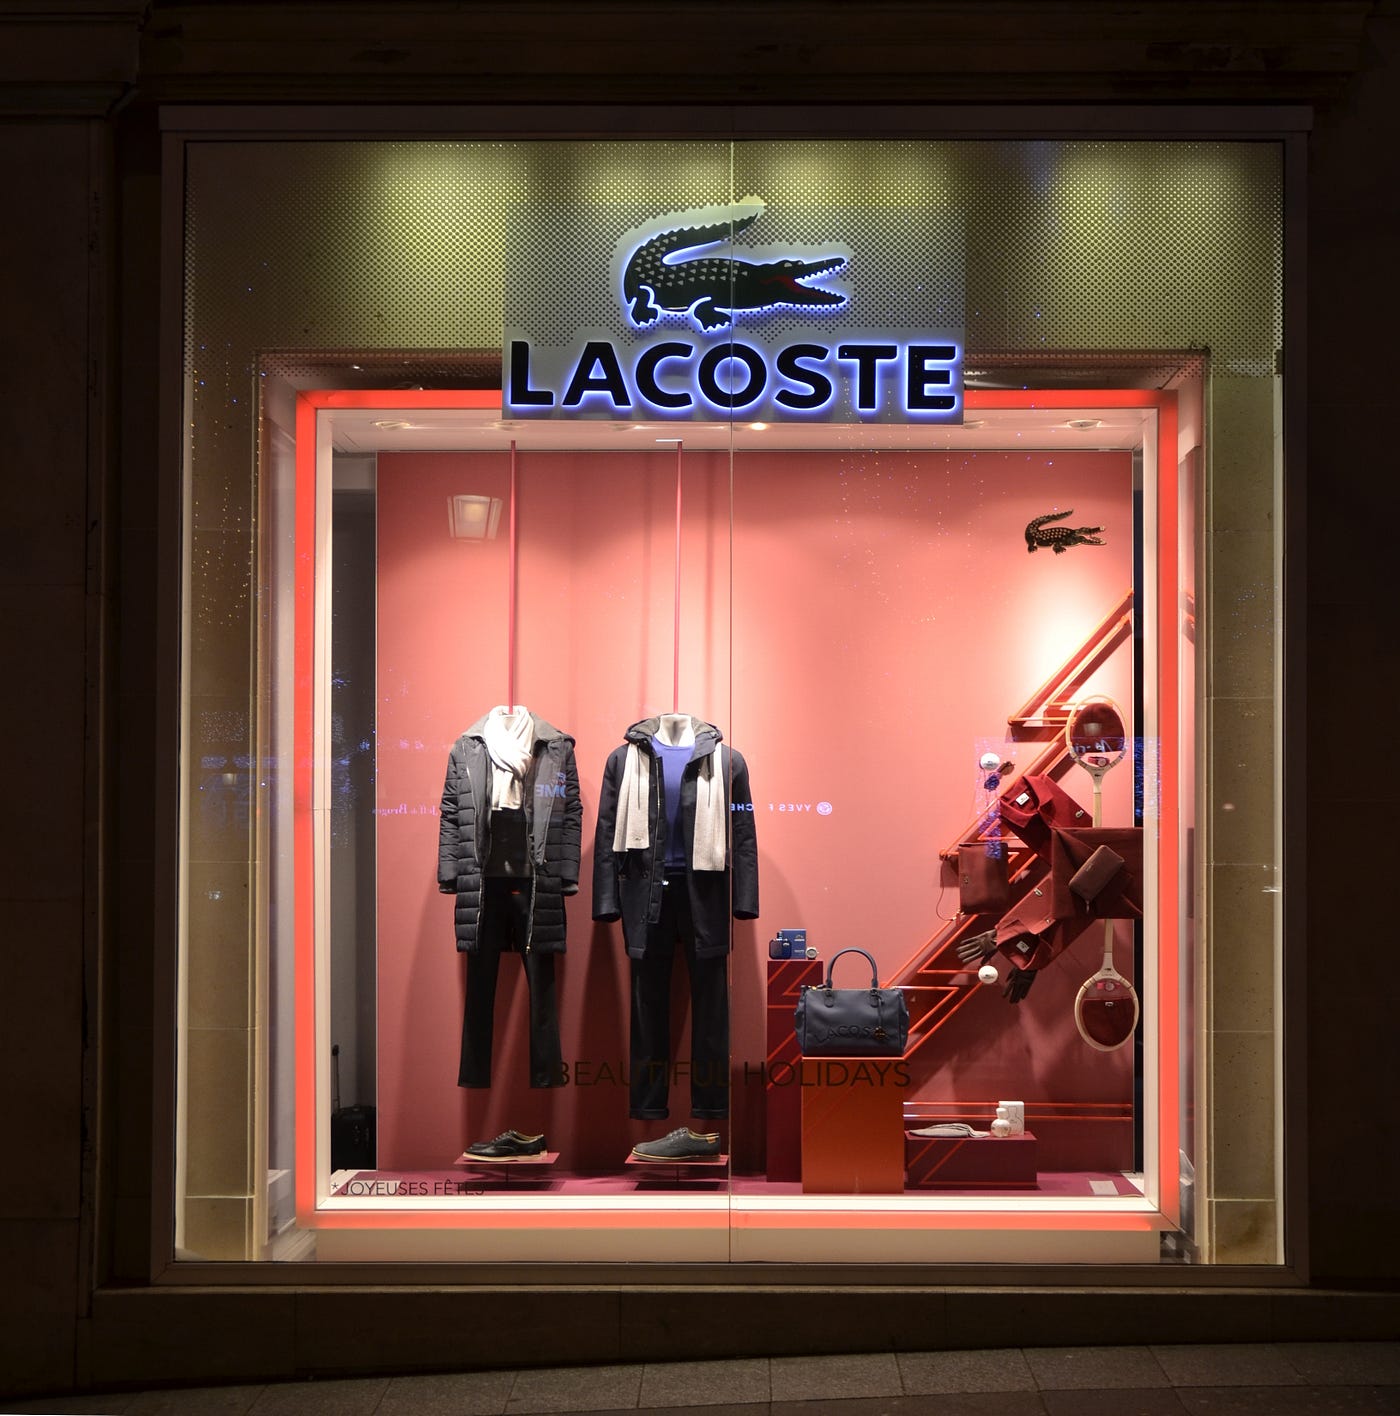 How Lacoste Barely Escaped a Clearance Sale | by Boba Franco | Medium